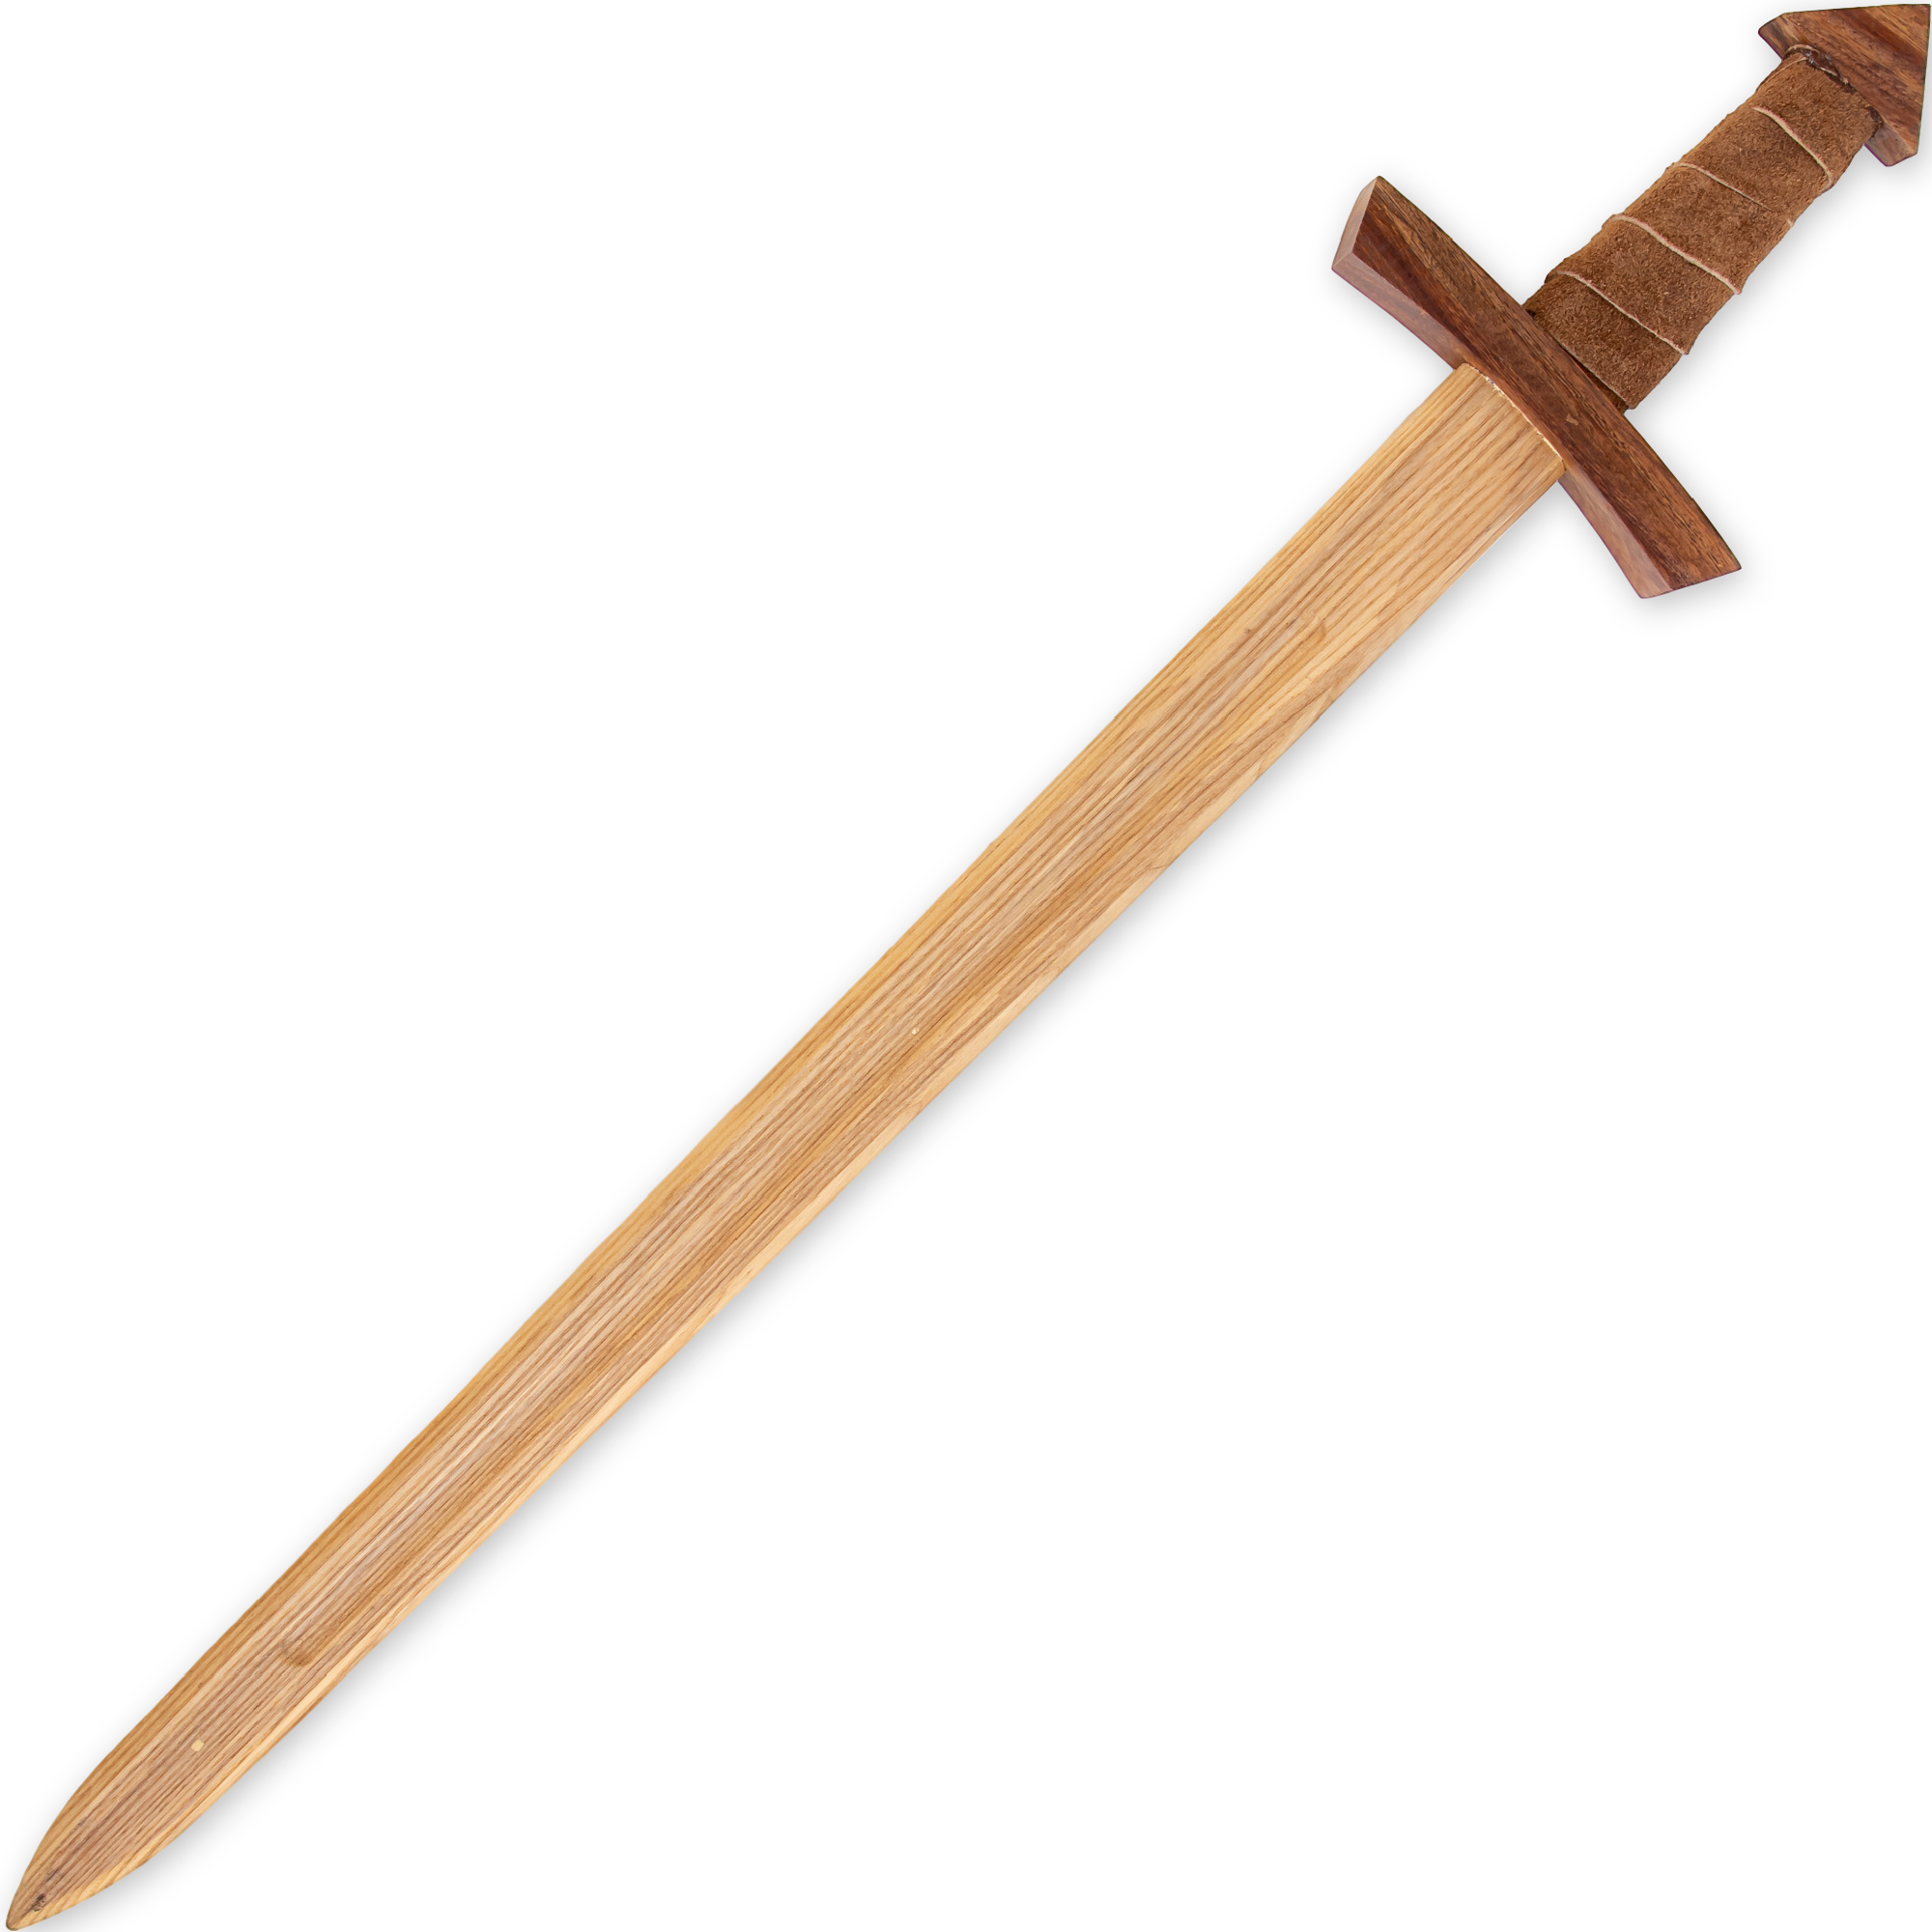 Steamed Beech Wood Replica Arming SWORD |Triangular Pommel & Leather Wrapped Handle